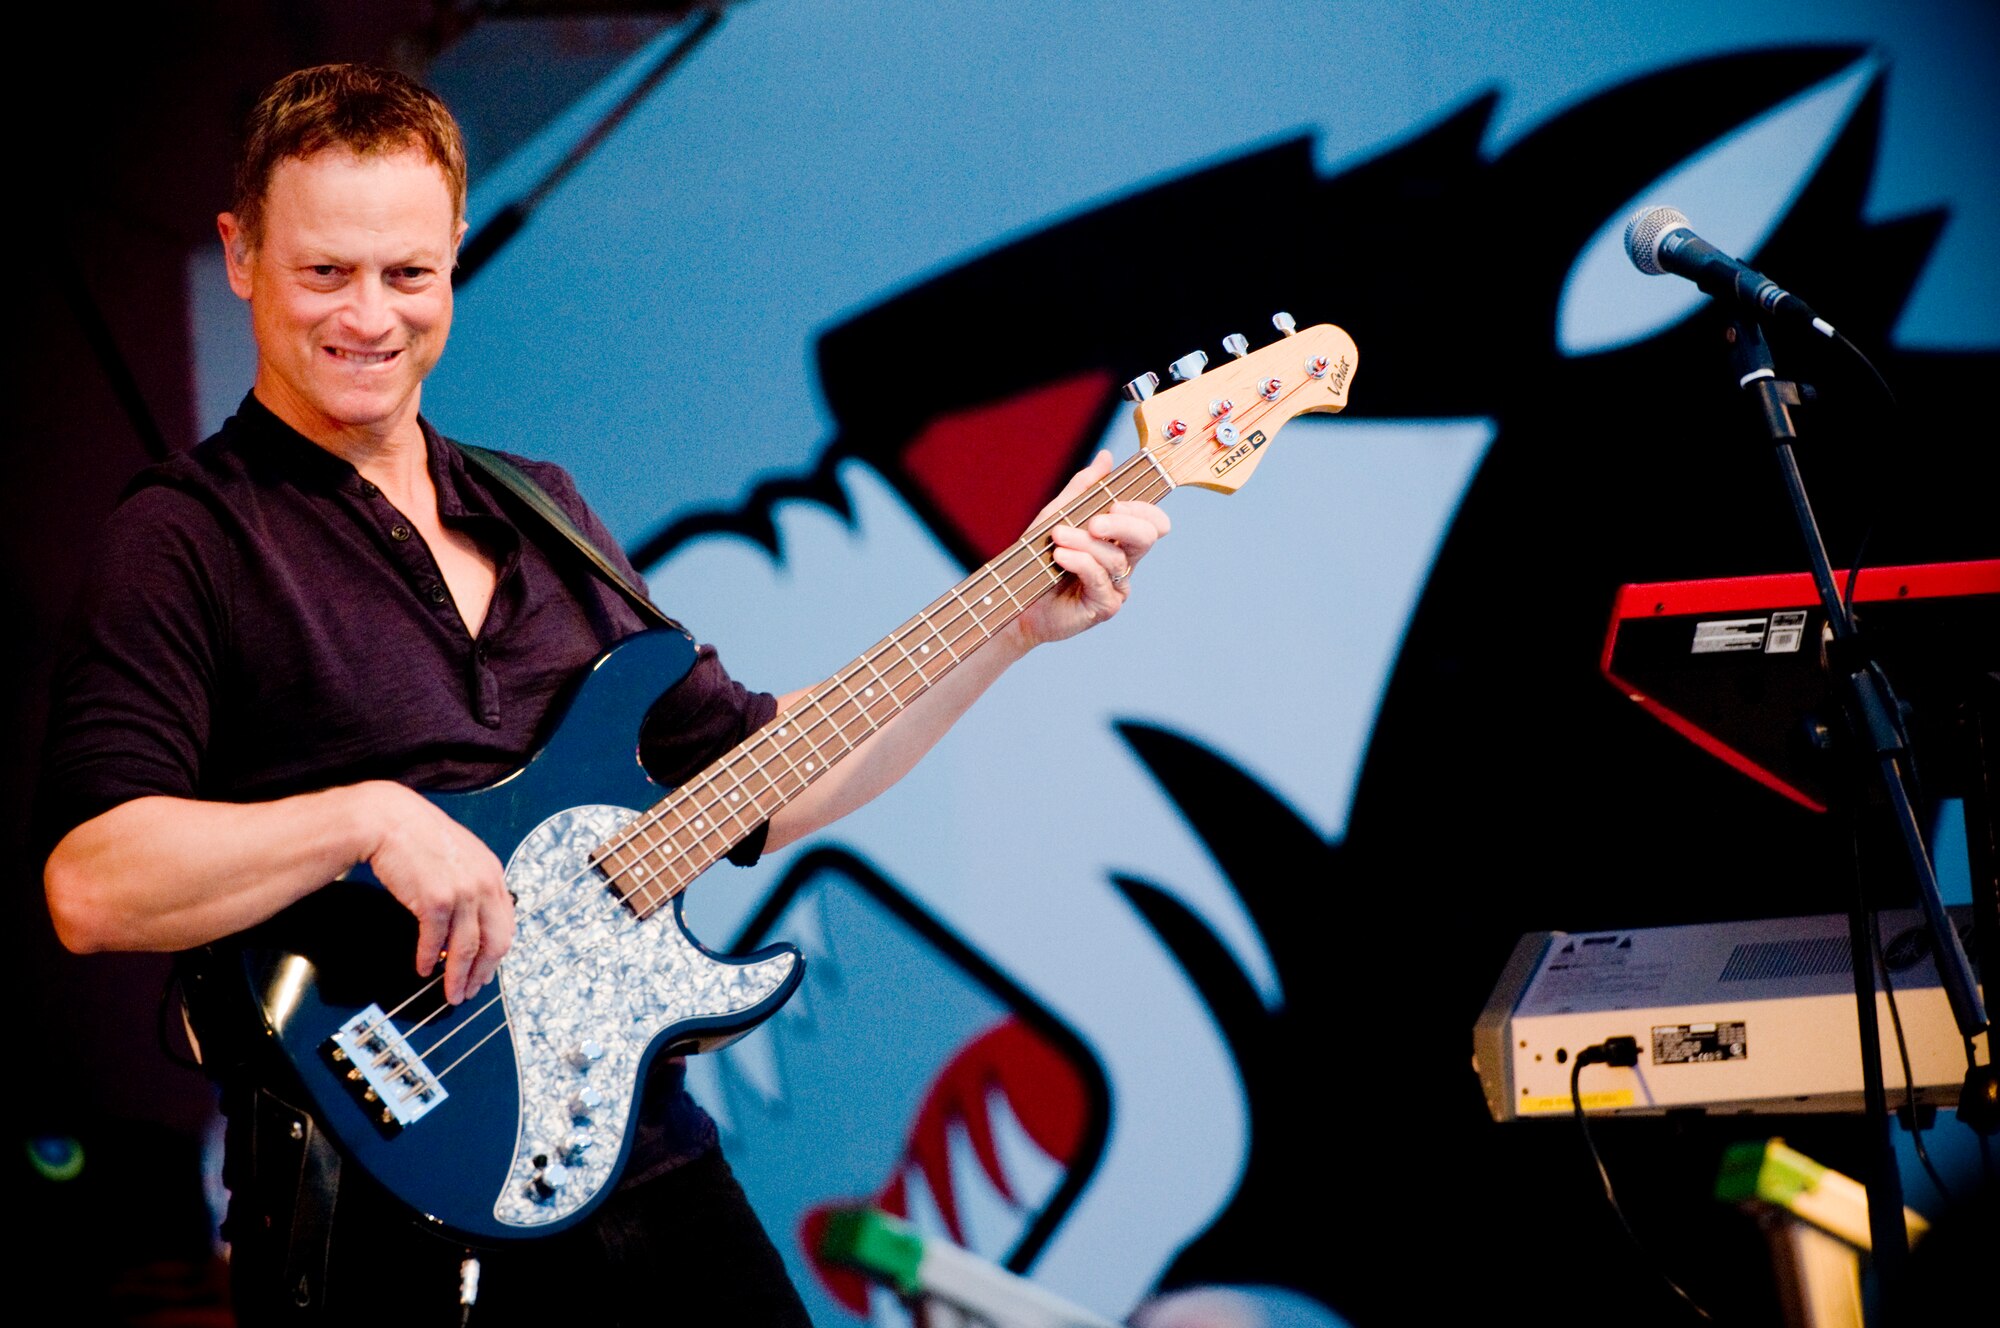 KUNSAN AIR BASE, Republic of Korea -- Gary Sinise, the bassist for the Lt. Dan Band, plucks the base guitar June 24. The Lt. Dan Band performed for approx. 900 Wolf Pack members during the concert. Kunsan Air Base, Republic of Korea is just one stop on their Asia USO tour this summer. (U.S. Air Force photo by Senior Airman Jonathan Steffen)